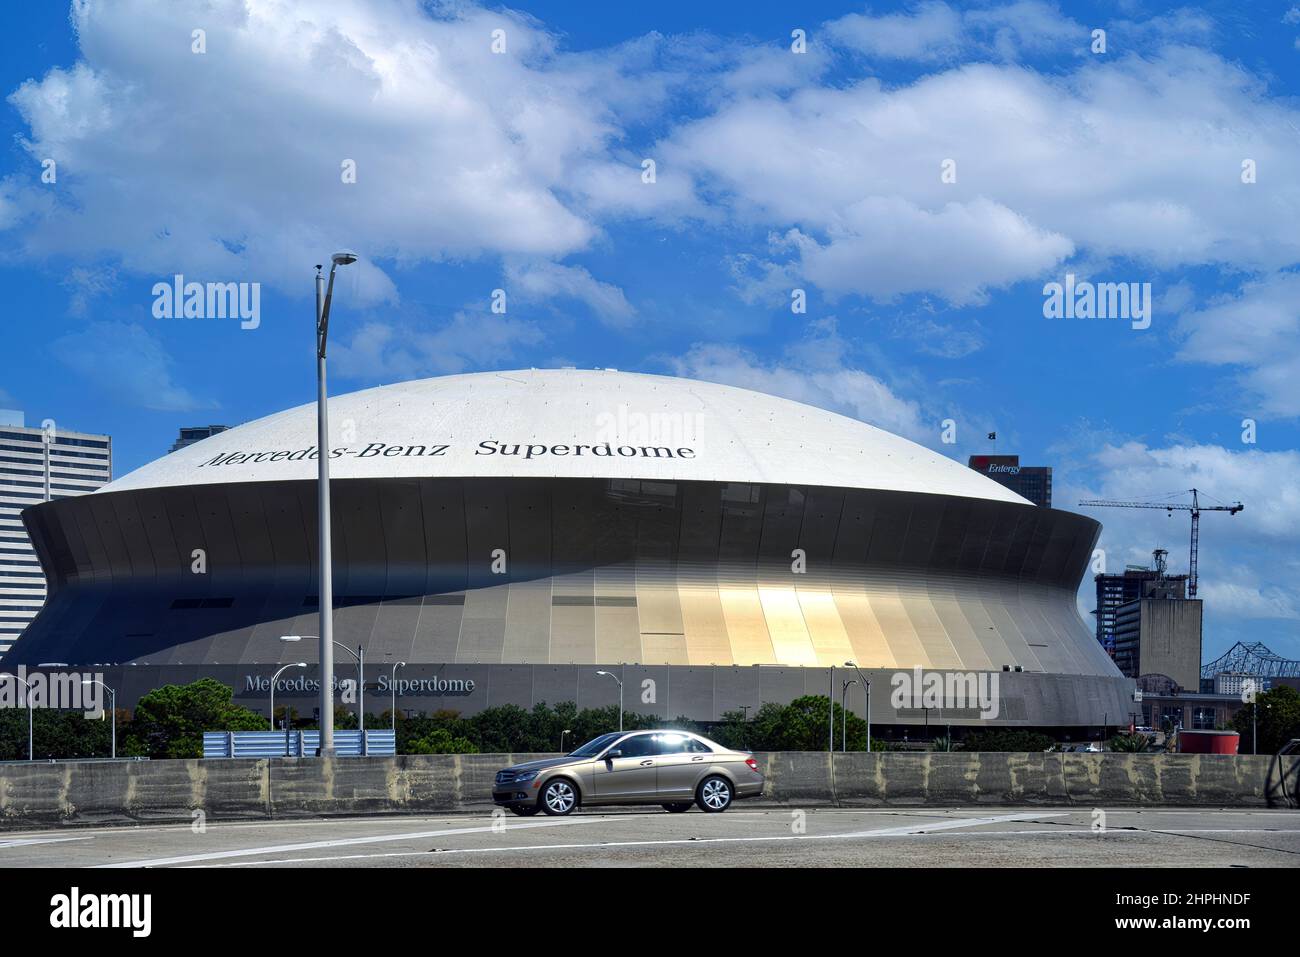 New Orleans, LA, USA - September 27, 2019: The Superdome, the famous multi-purpose stadium that houses the NFL team the New Orleans Saints.  In 2021 the naming rights switched from Mercedes-Benz to Caesars. In 2005, the Superdome temporarily housed thousands of people left homeless due to Hurricane Katrina Stock Photo